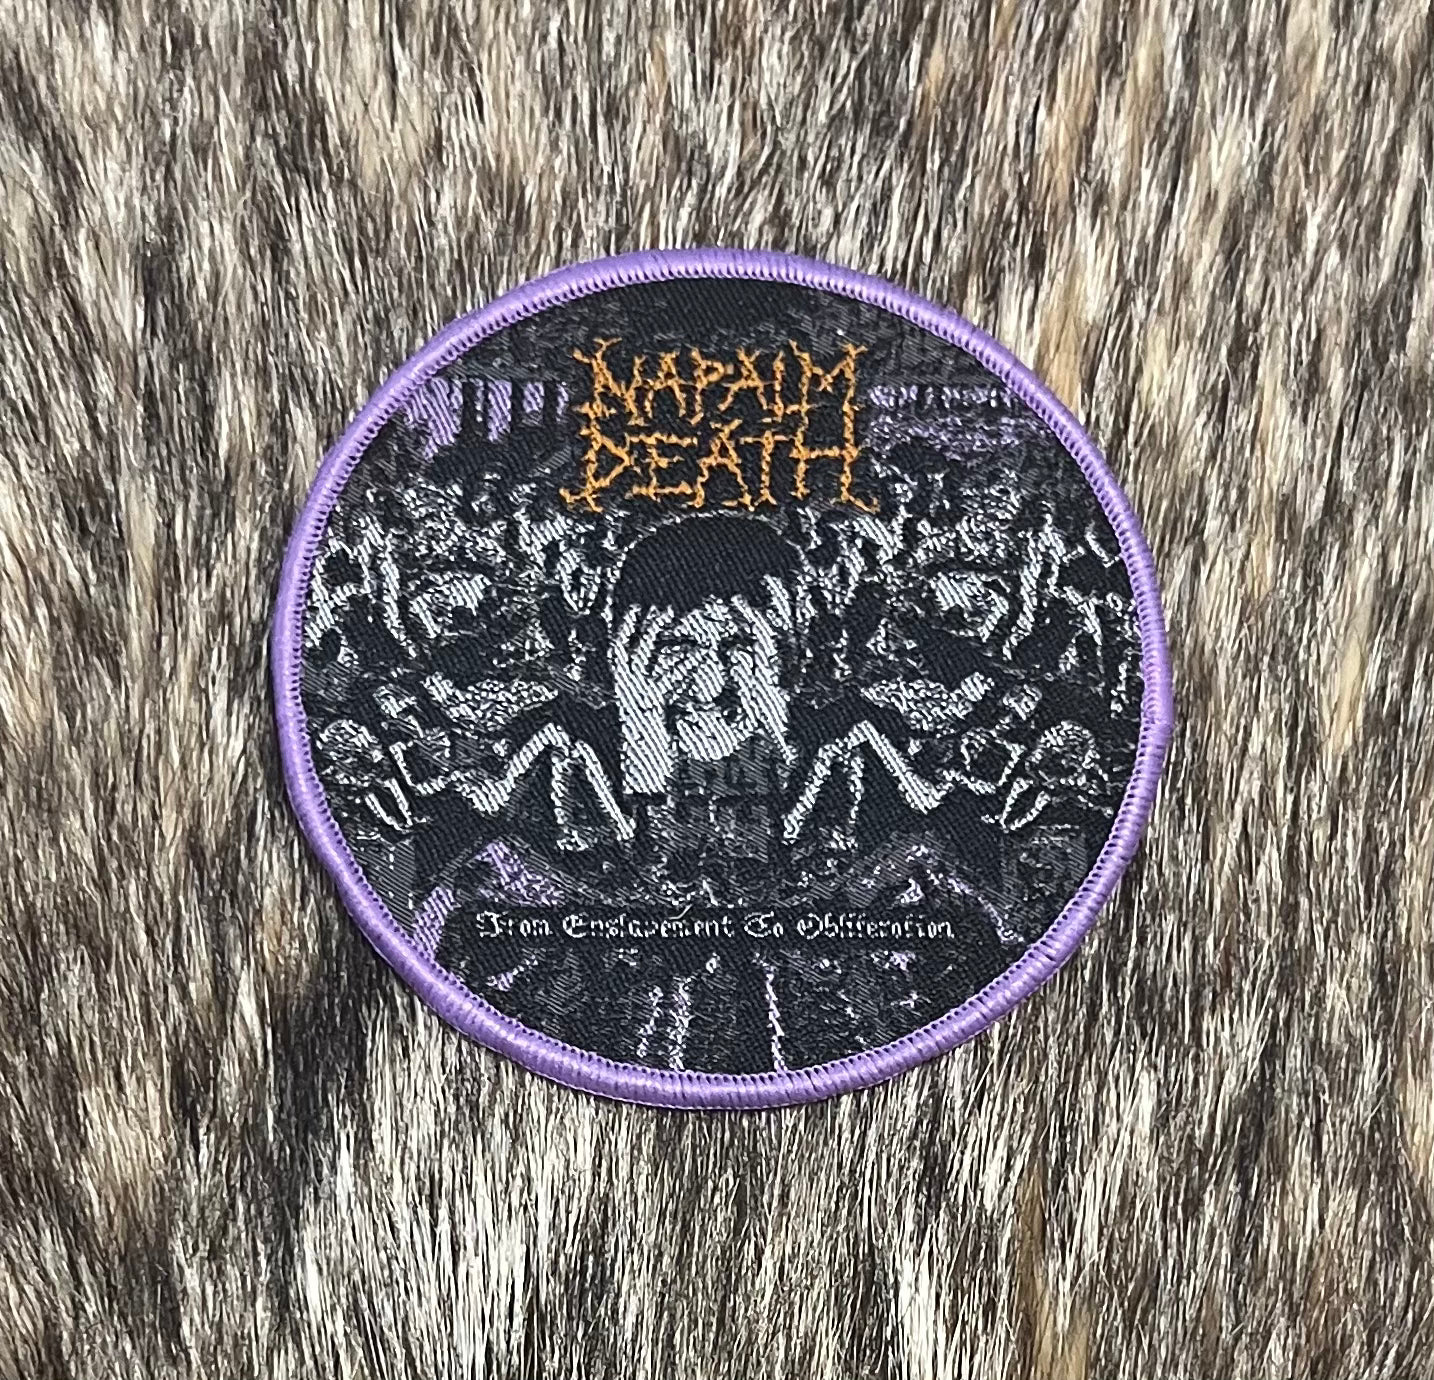 Napalm Death - From Enslavement Patch